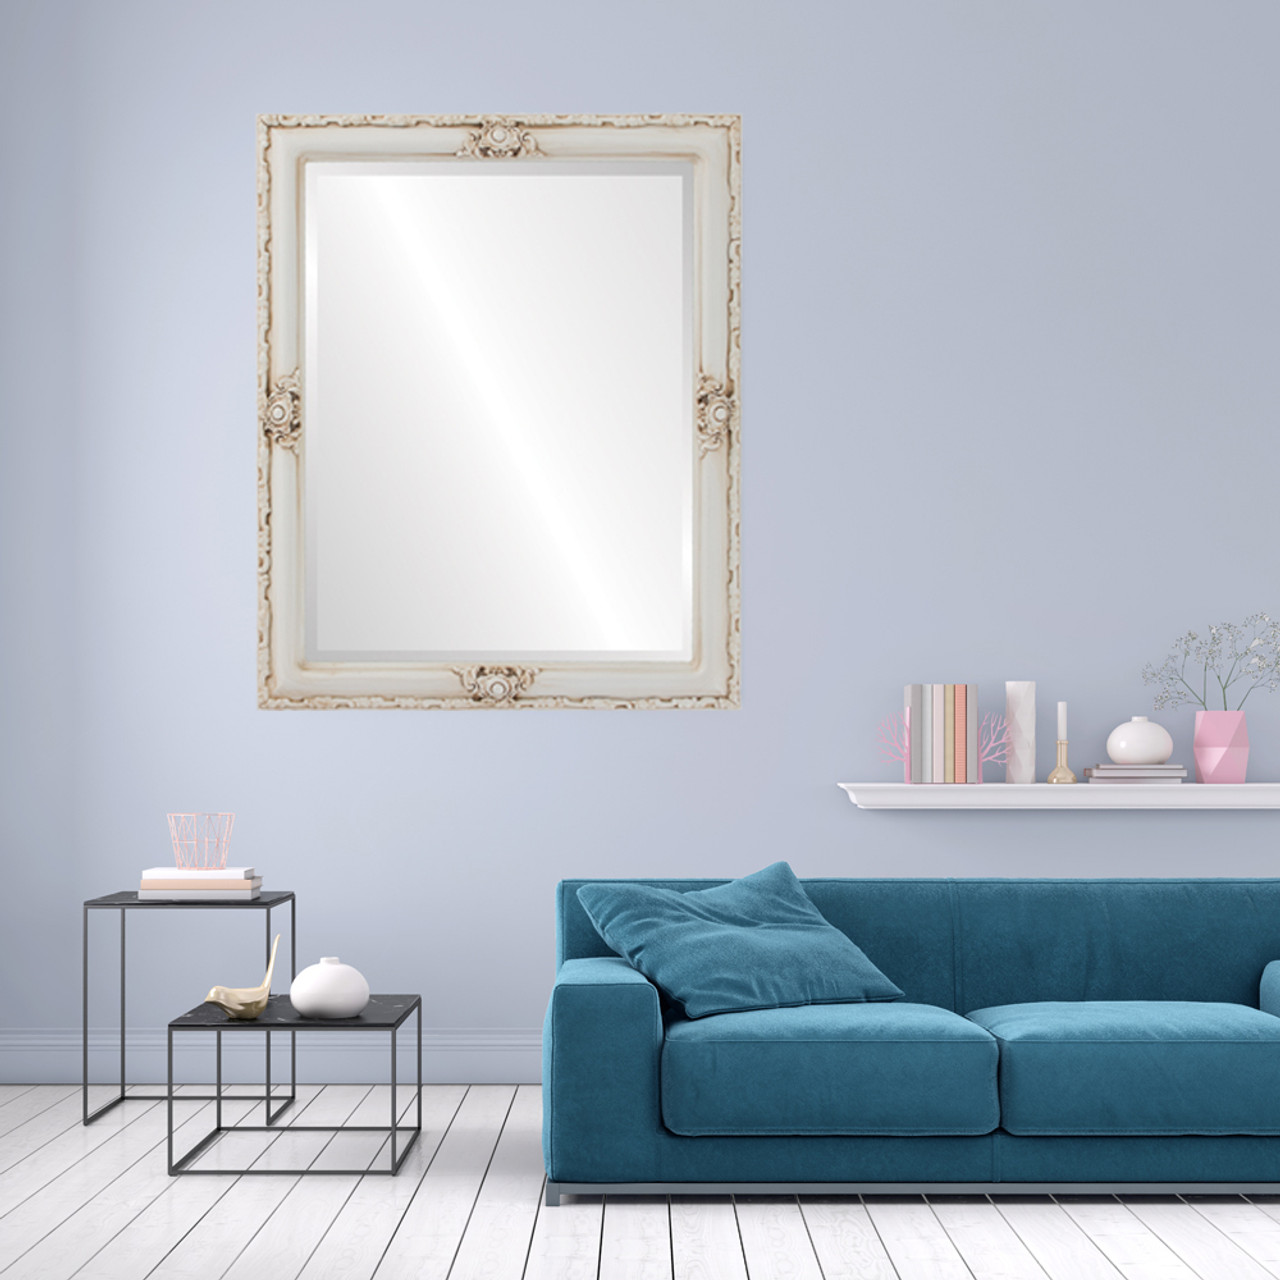 Antique White Rectangle Mirrors from $136 Free Shipping